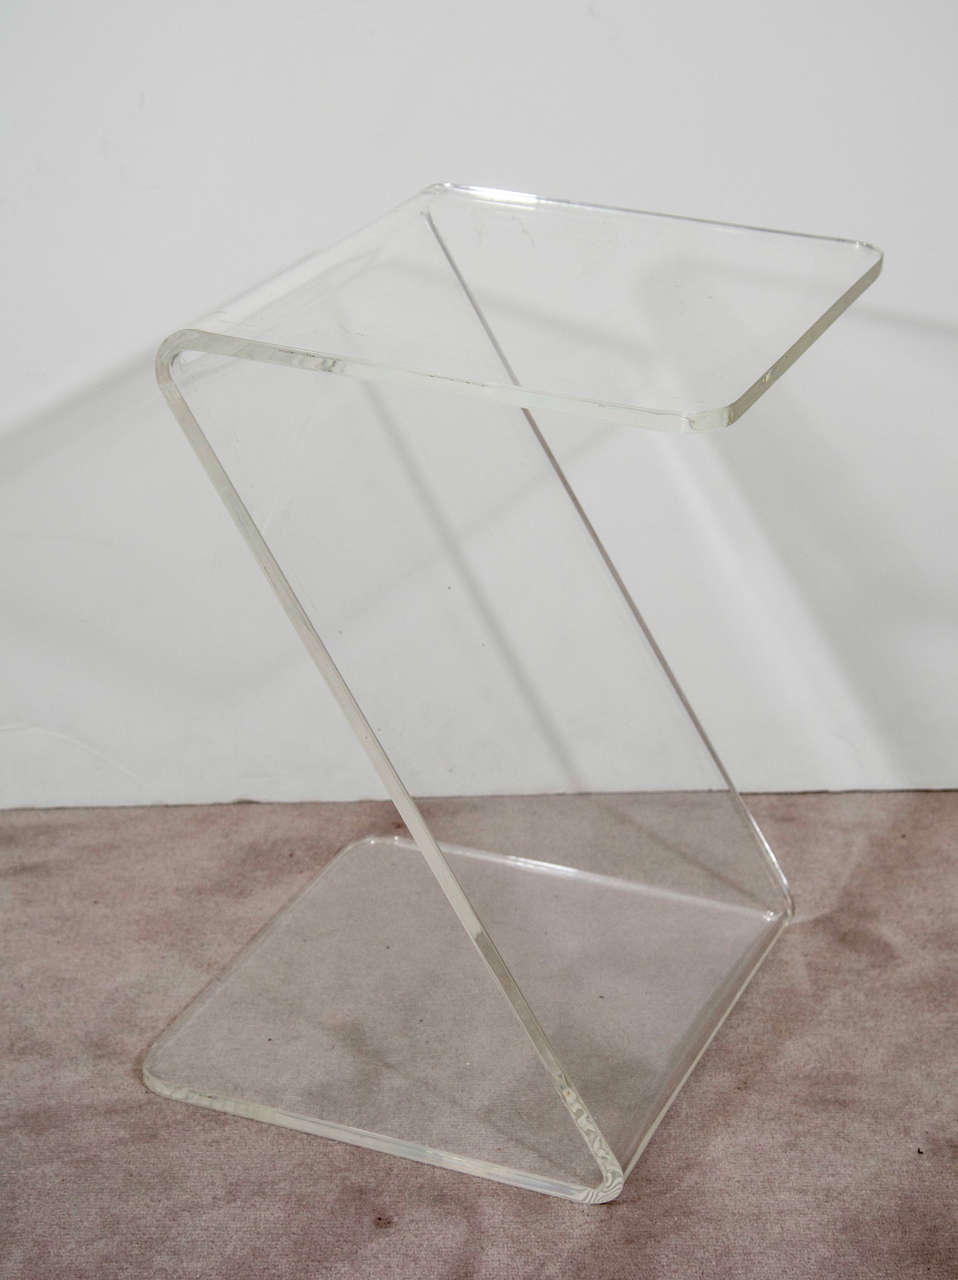 A petite vintage side table composed of clear lucite in a zig-zag form.